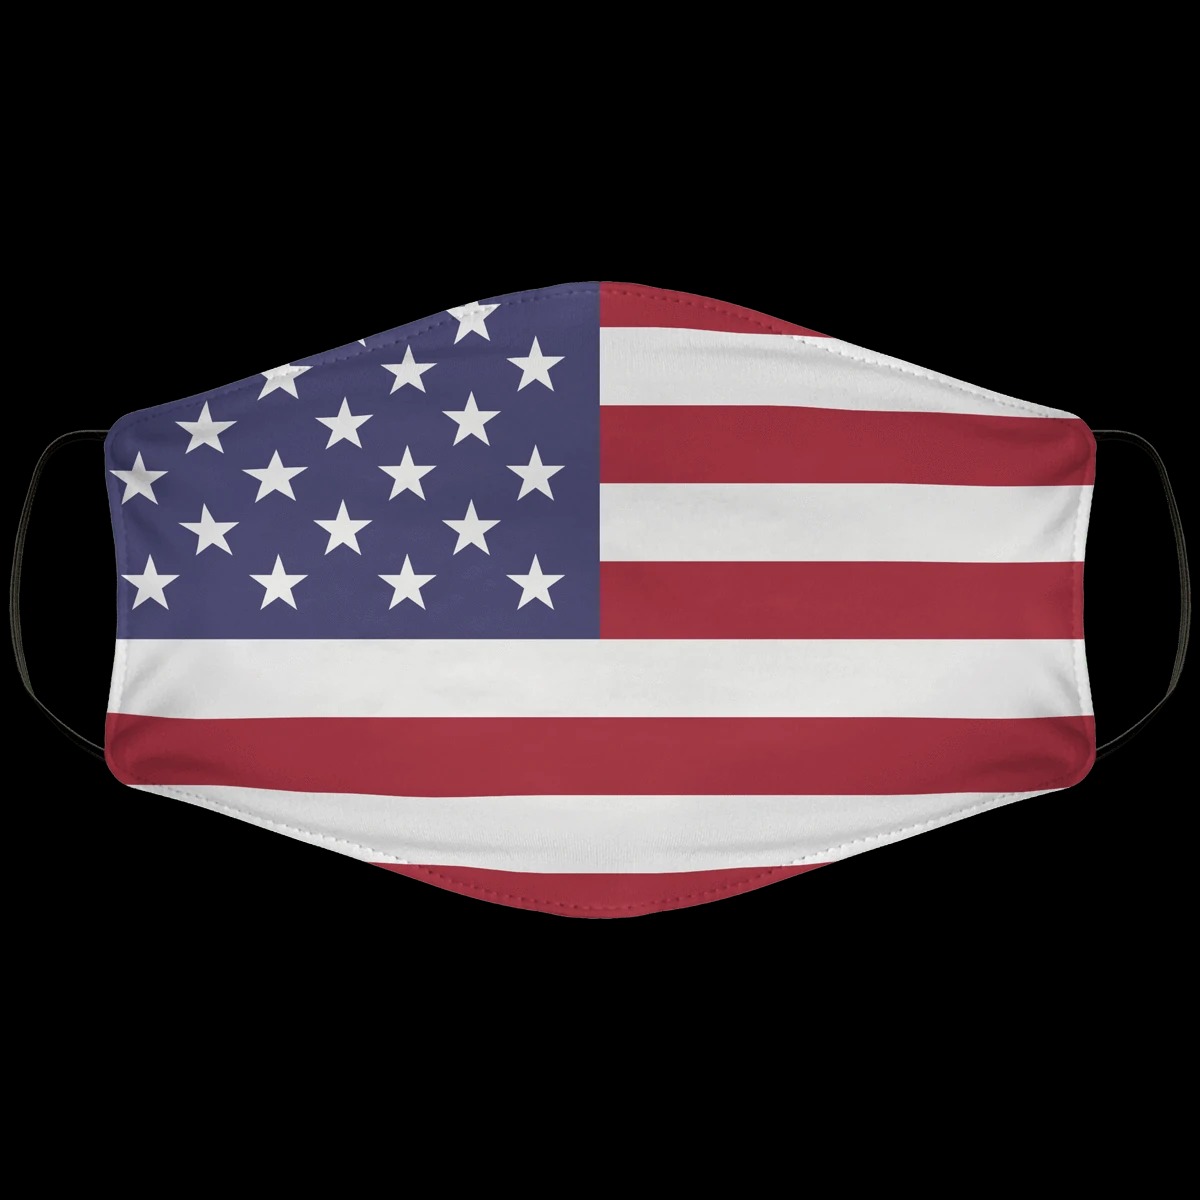 American flag cloth face mask